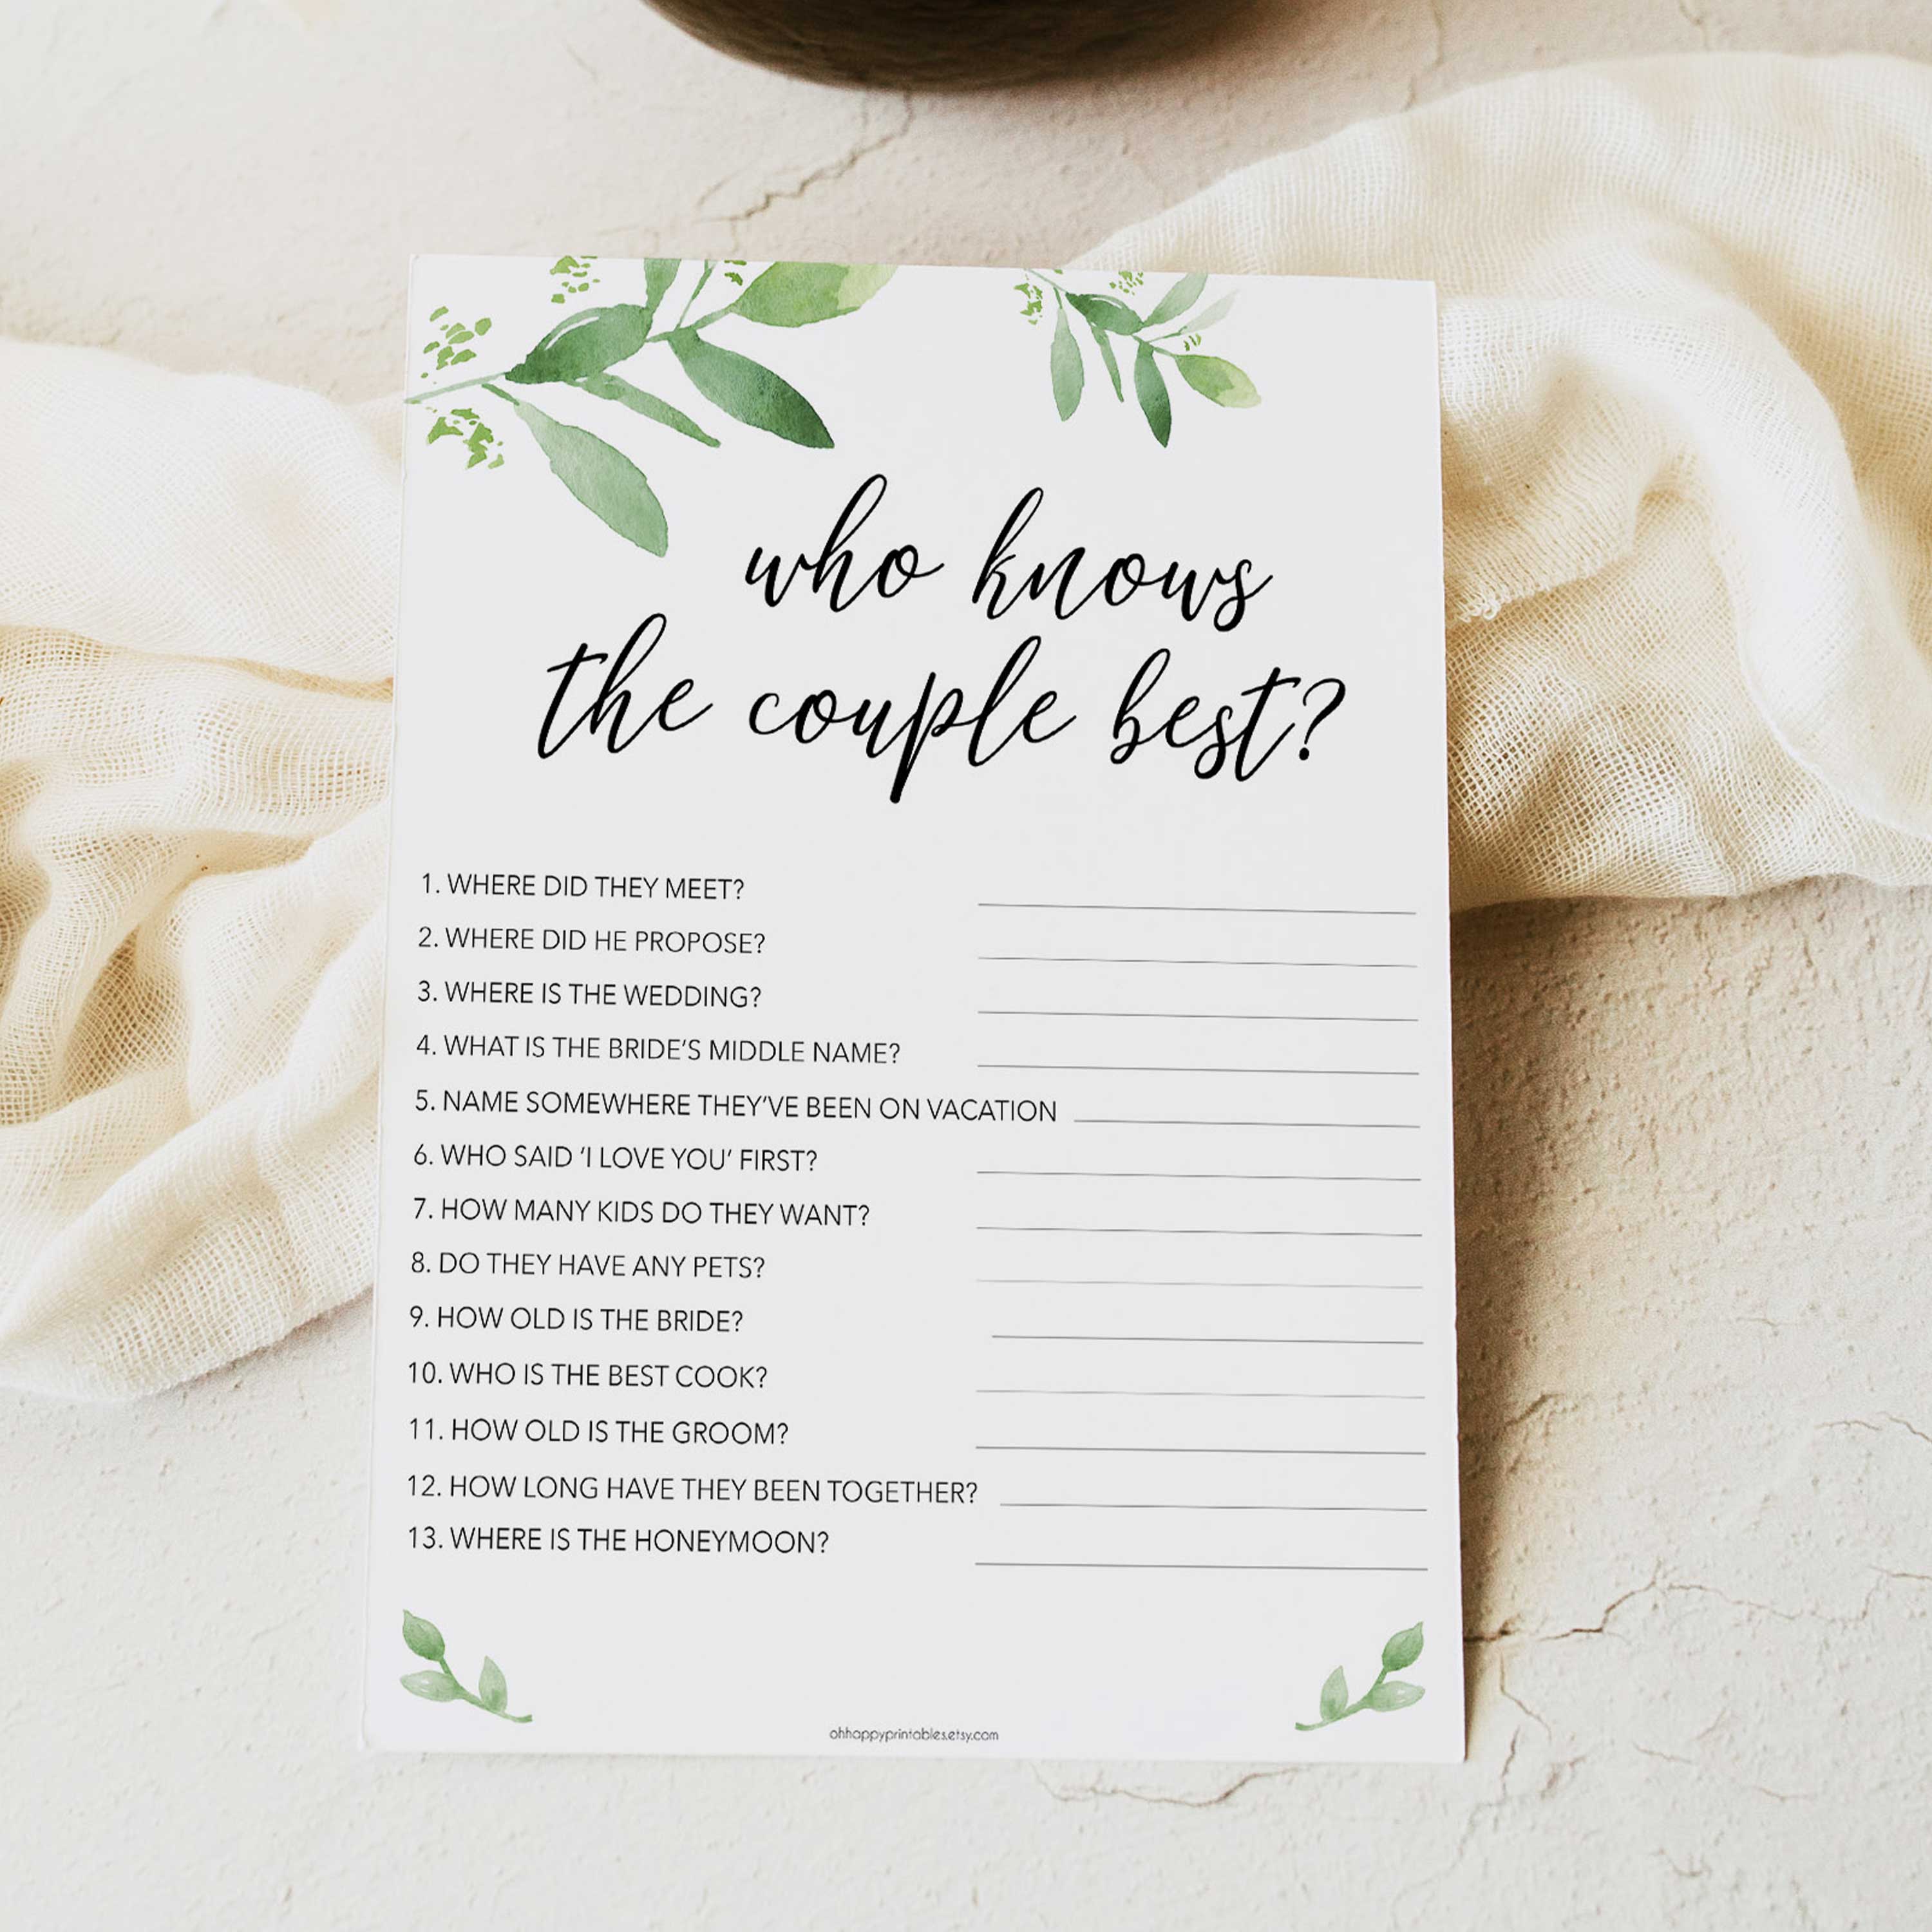 who knows the couple best game, greenery bridal shower, fun bridal shower games, bachelorette party games, floral bridal games, hen party ideas